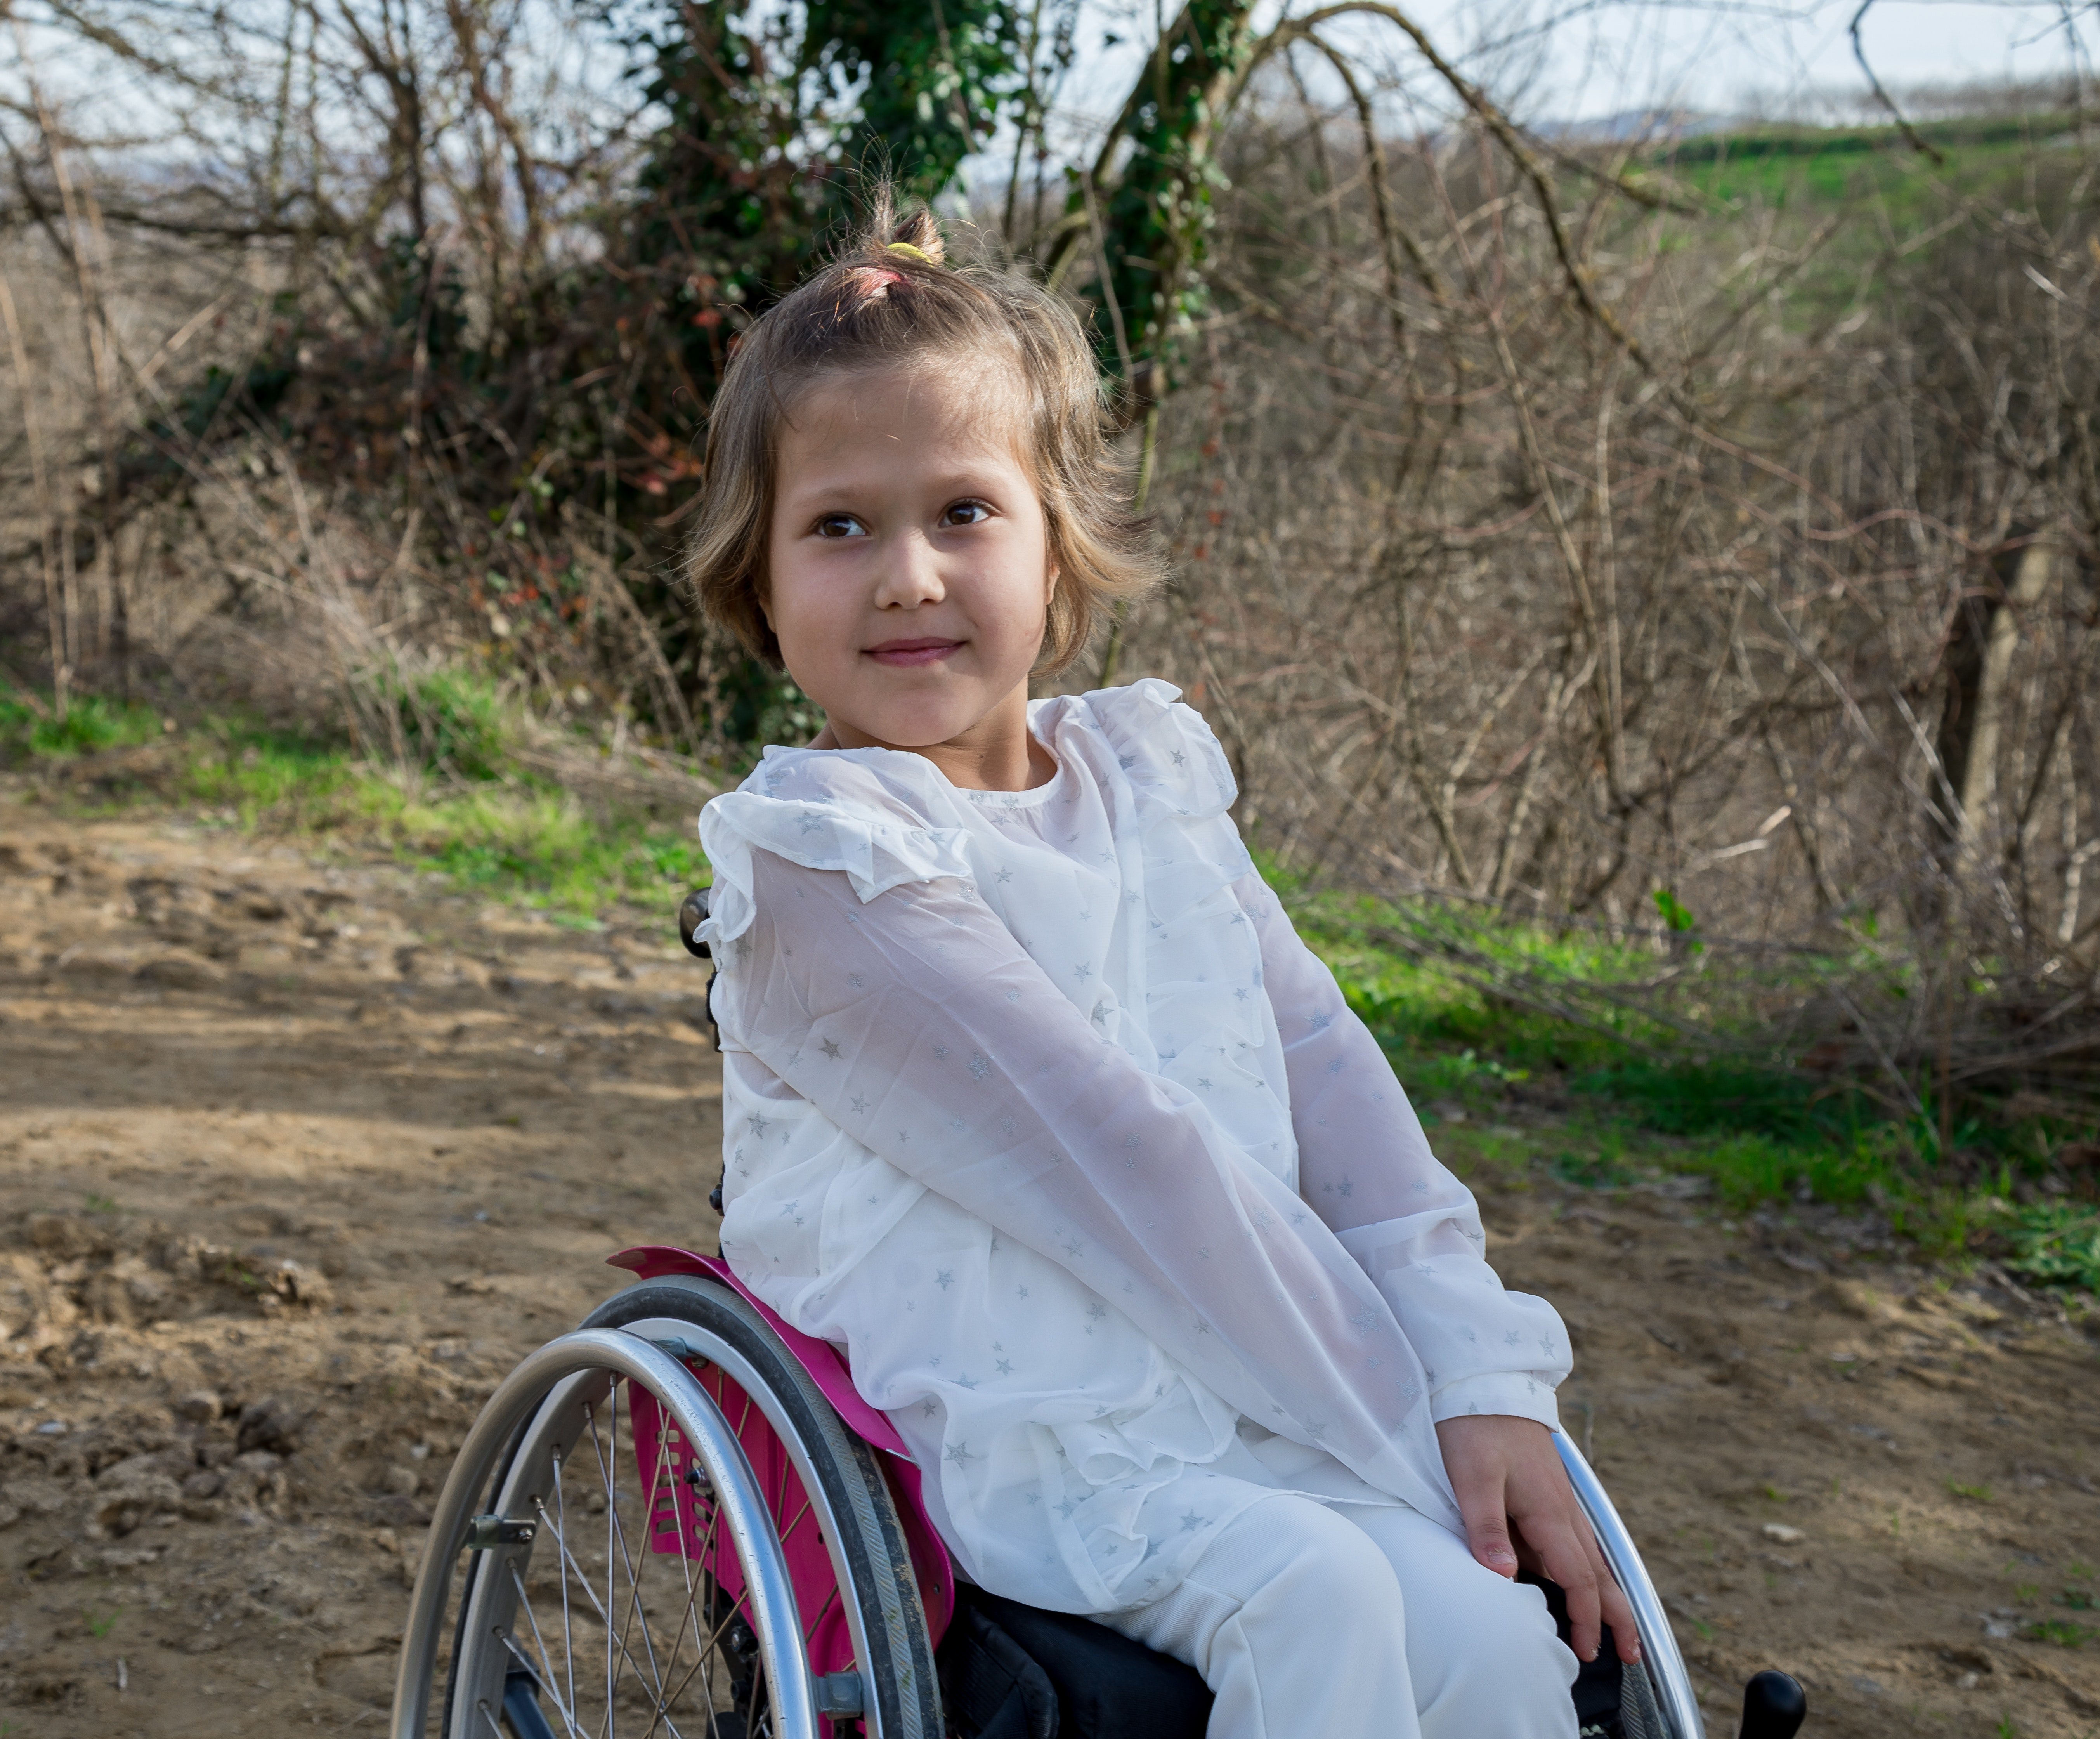 The young girl in a wheelchair lived with Mrs. Murphy. | Source: Pexels